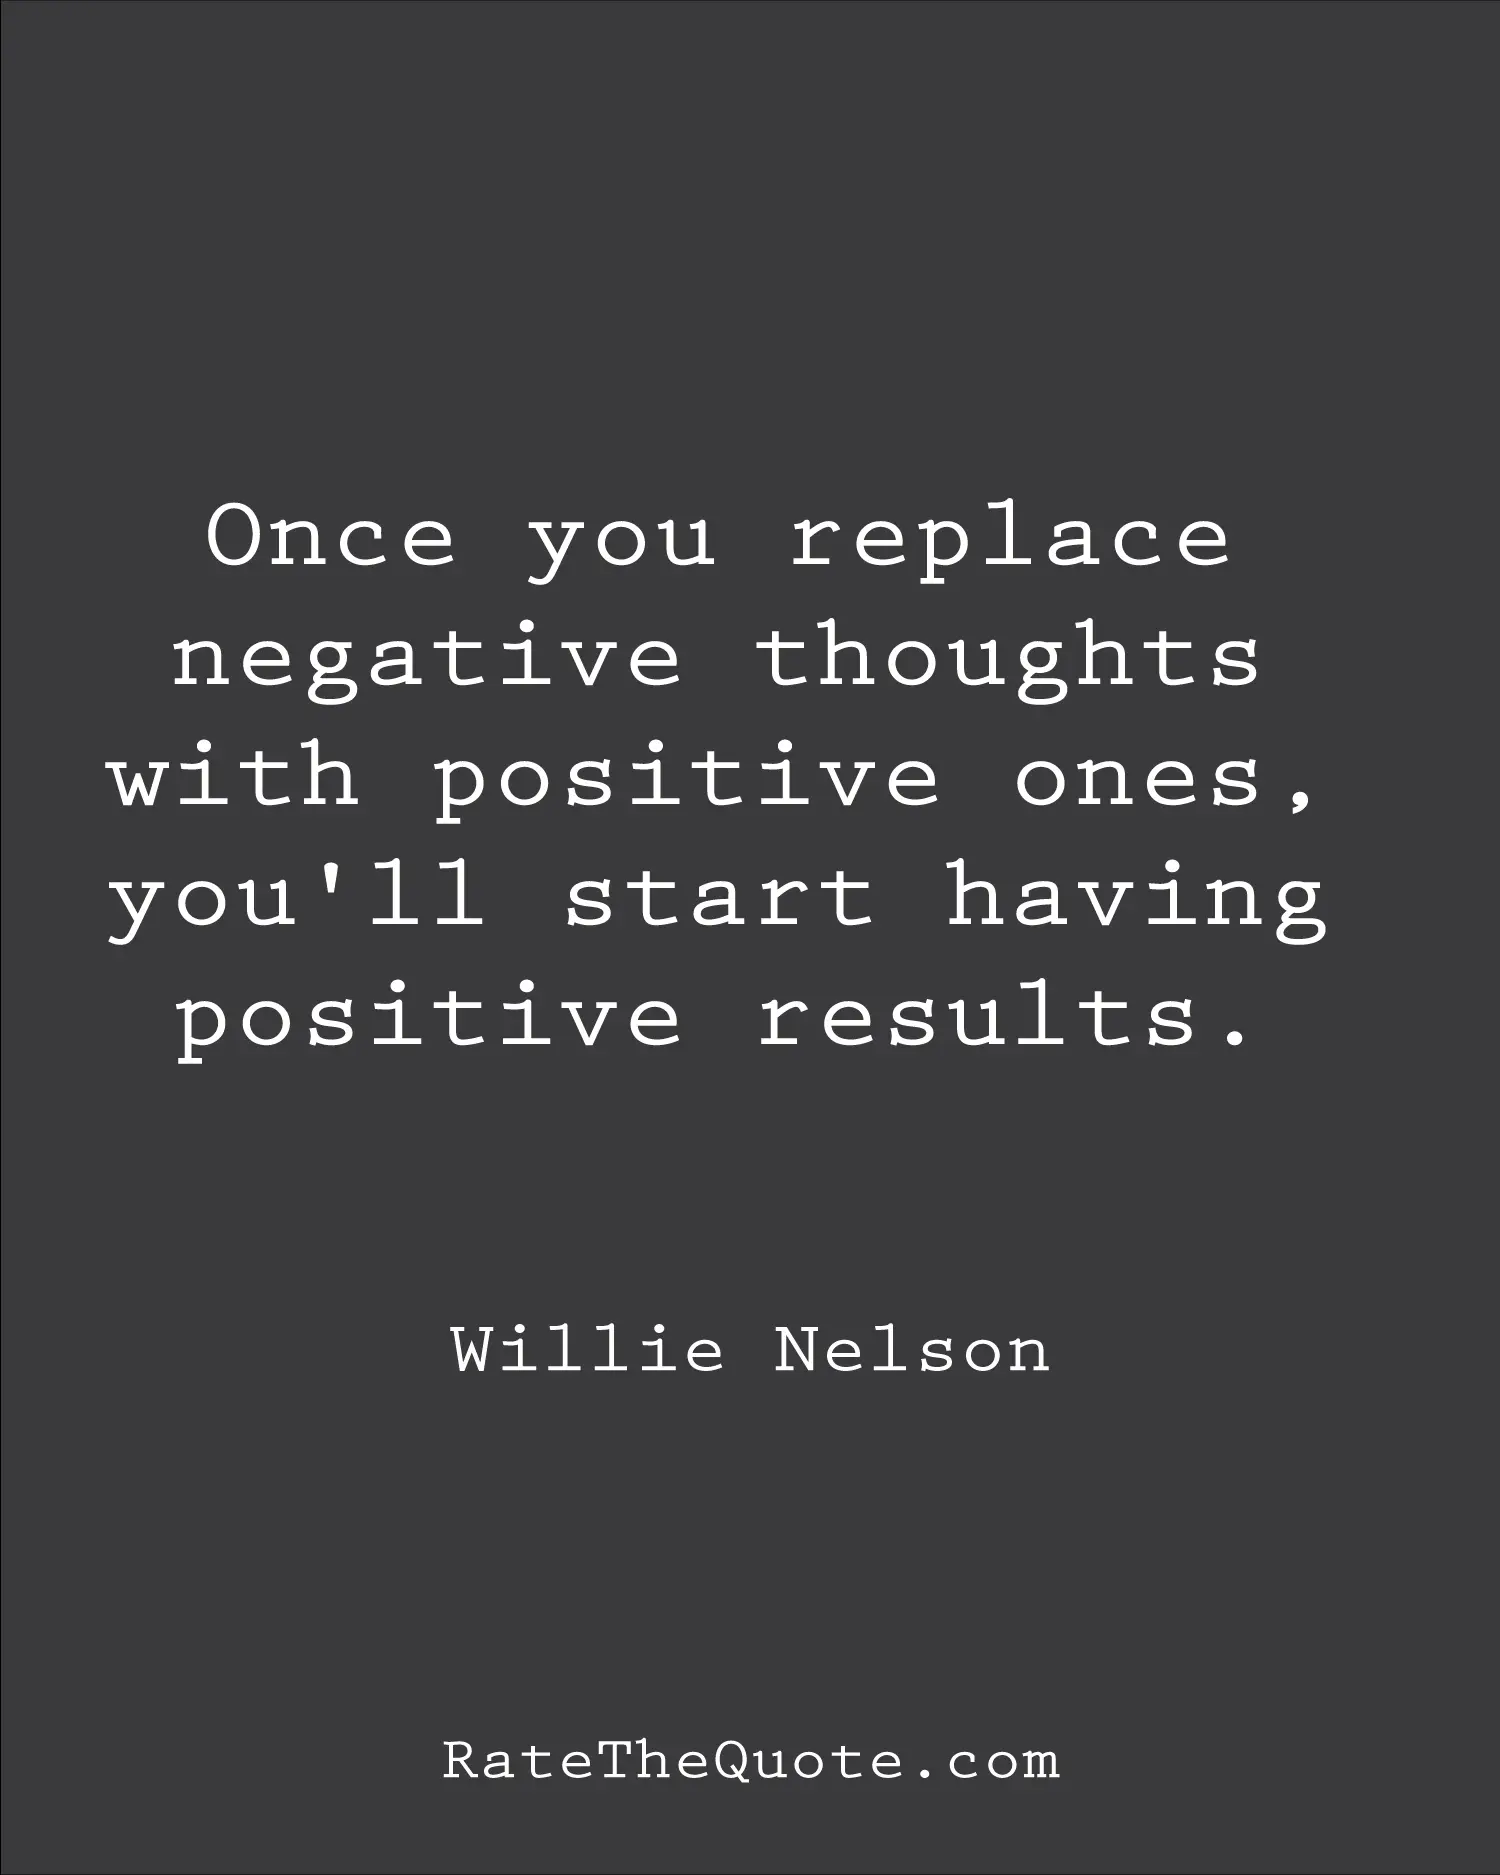 Once you replace negative thoughts with positive ones, you'll start having positive results. Willie Nelson